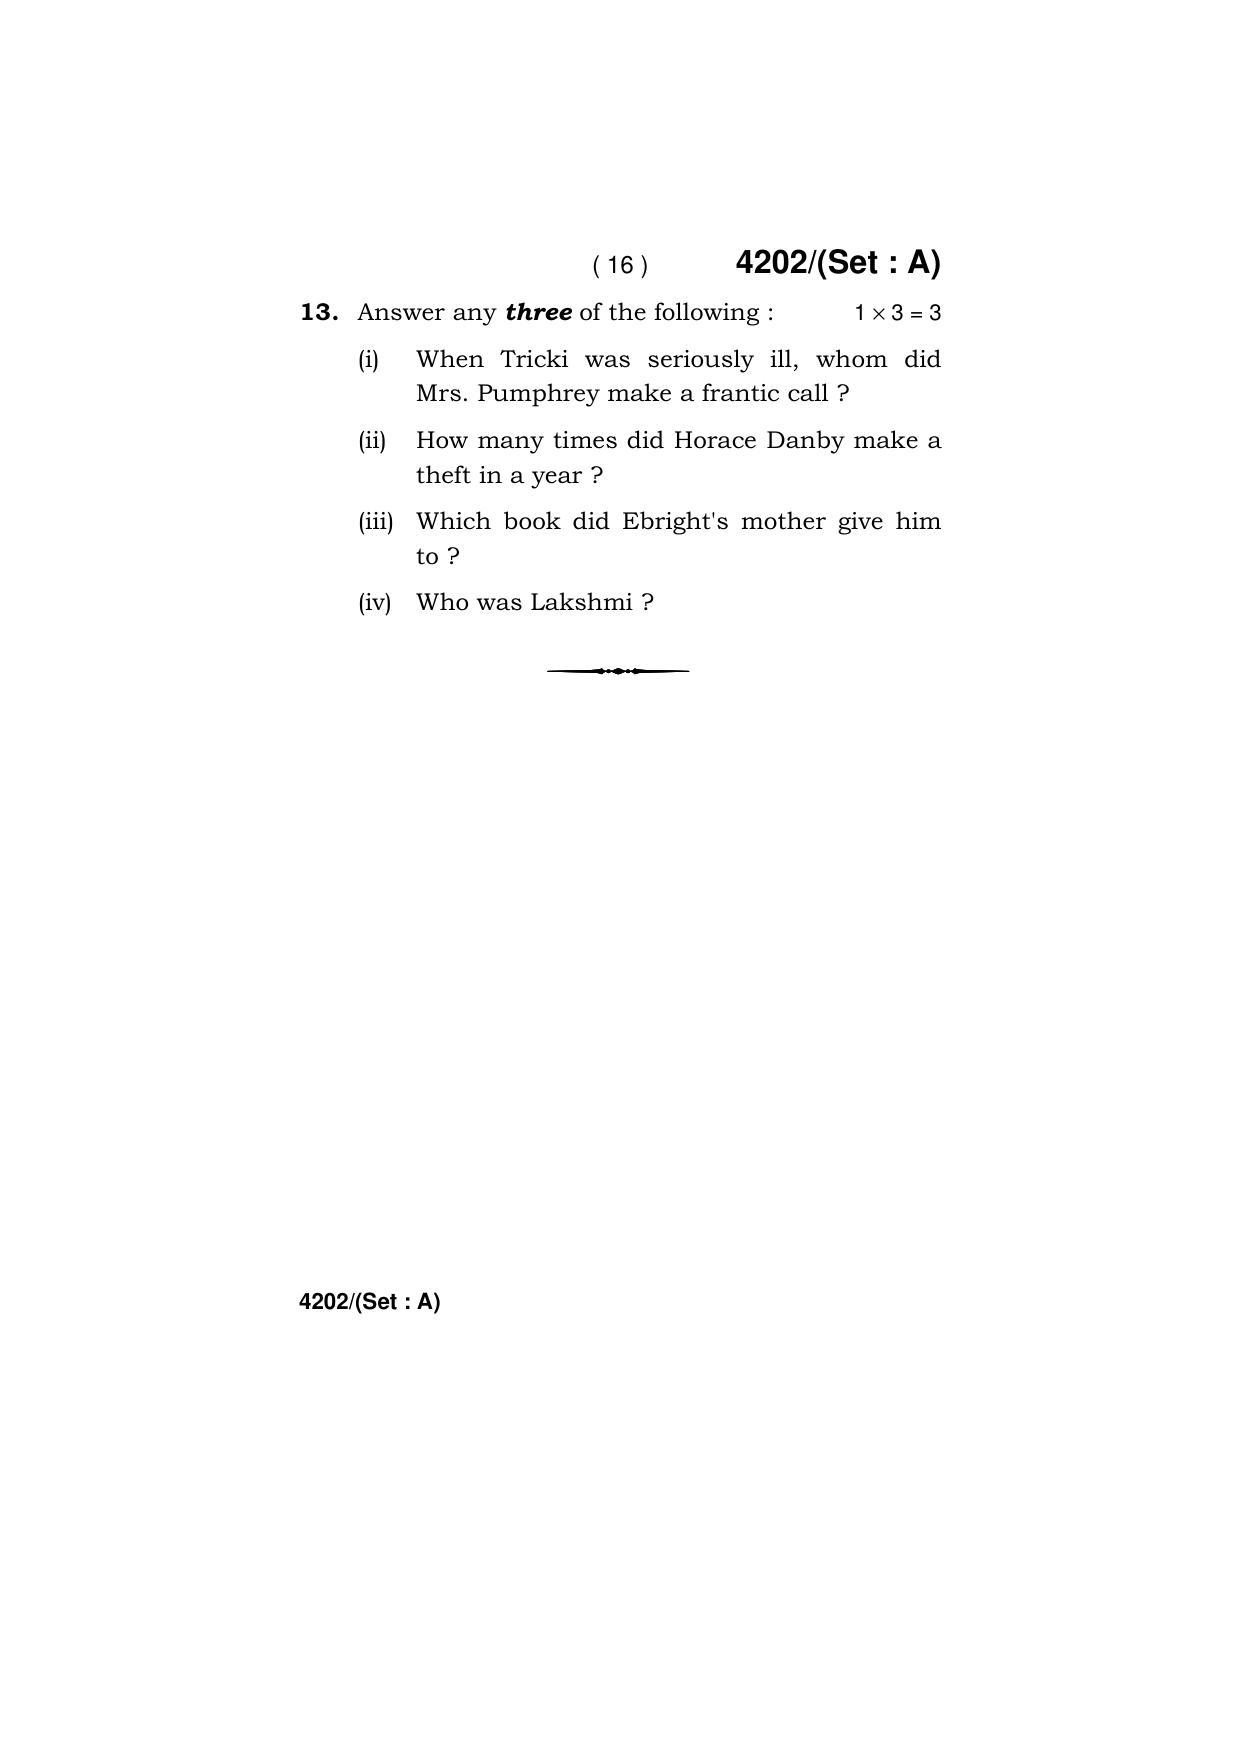 Haryana Board HBSE Class 10 English (All Set) 2019 Question Paper - Page 16